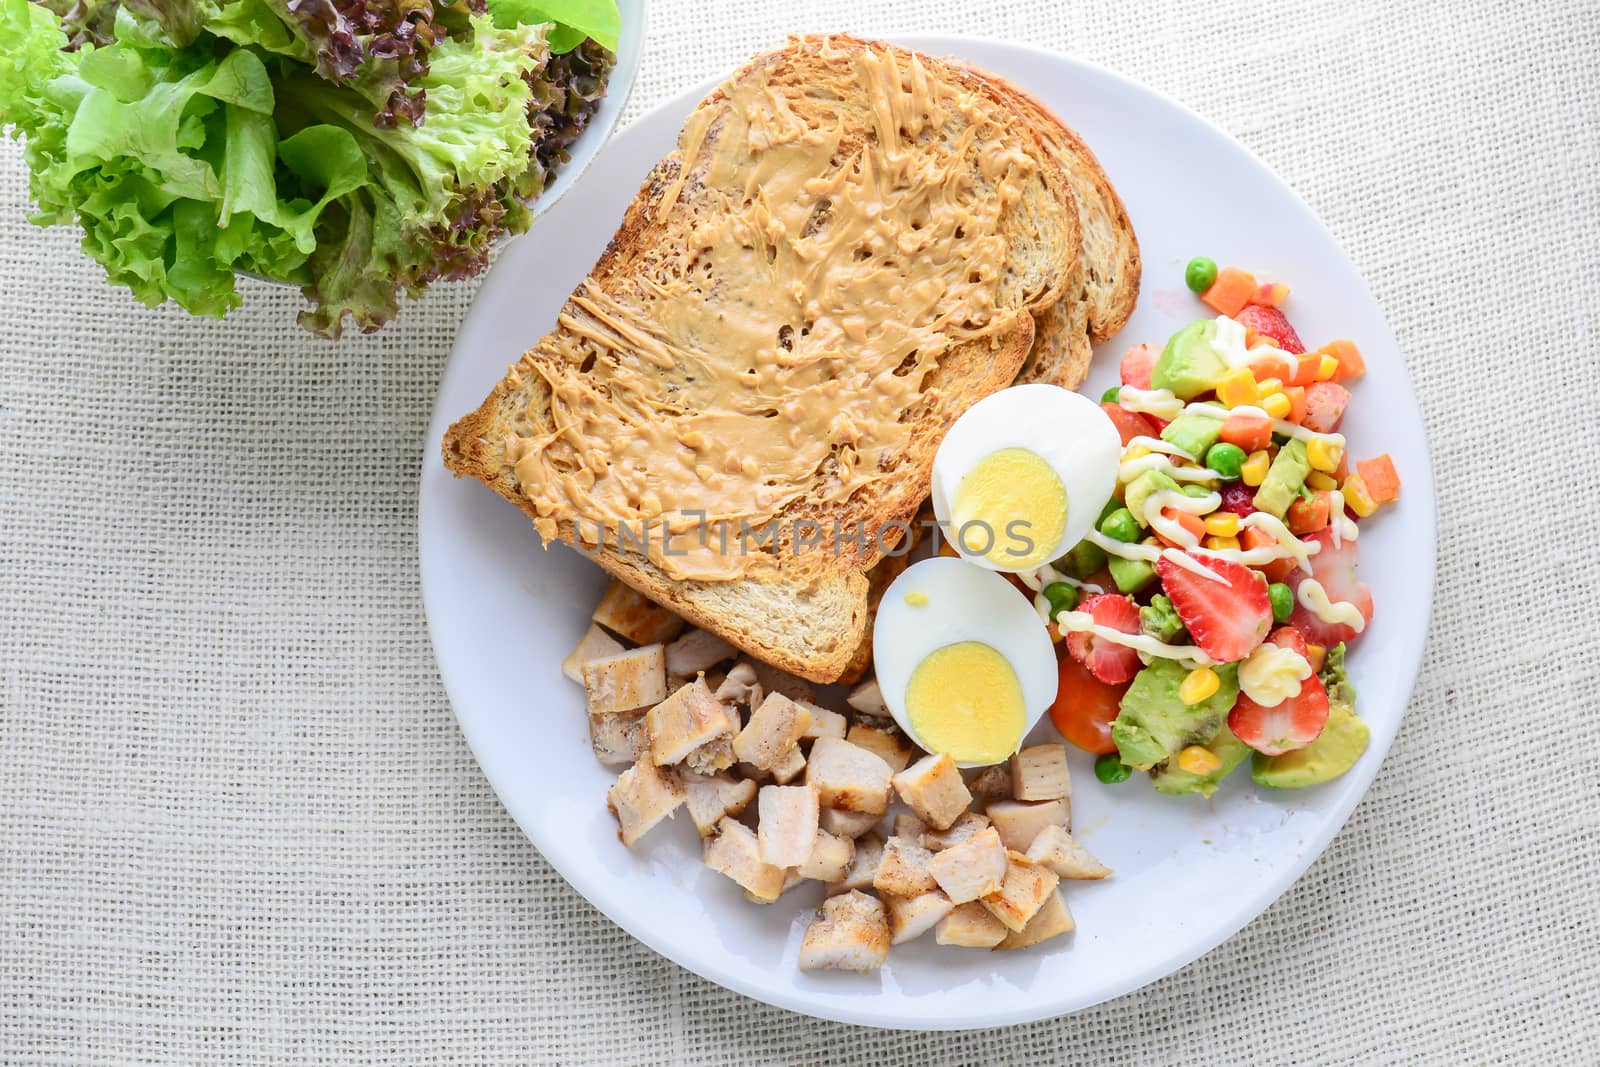 Modern style clean food, Peanut butter with bread, boiled egg, g by yuiyuize